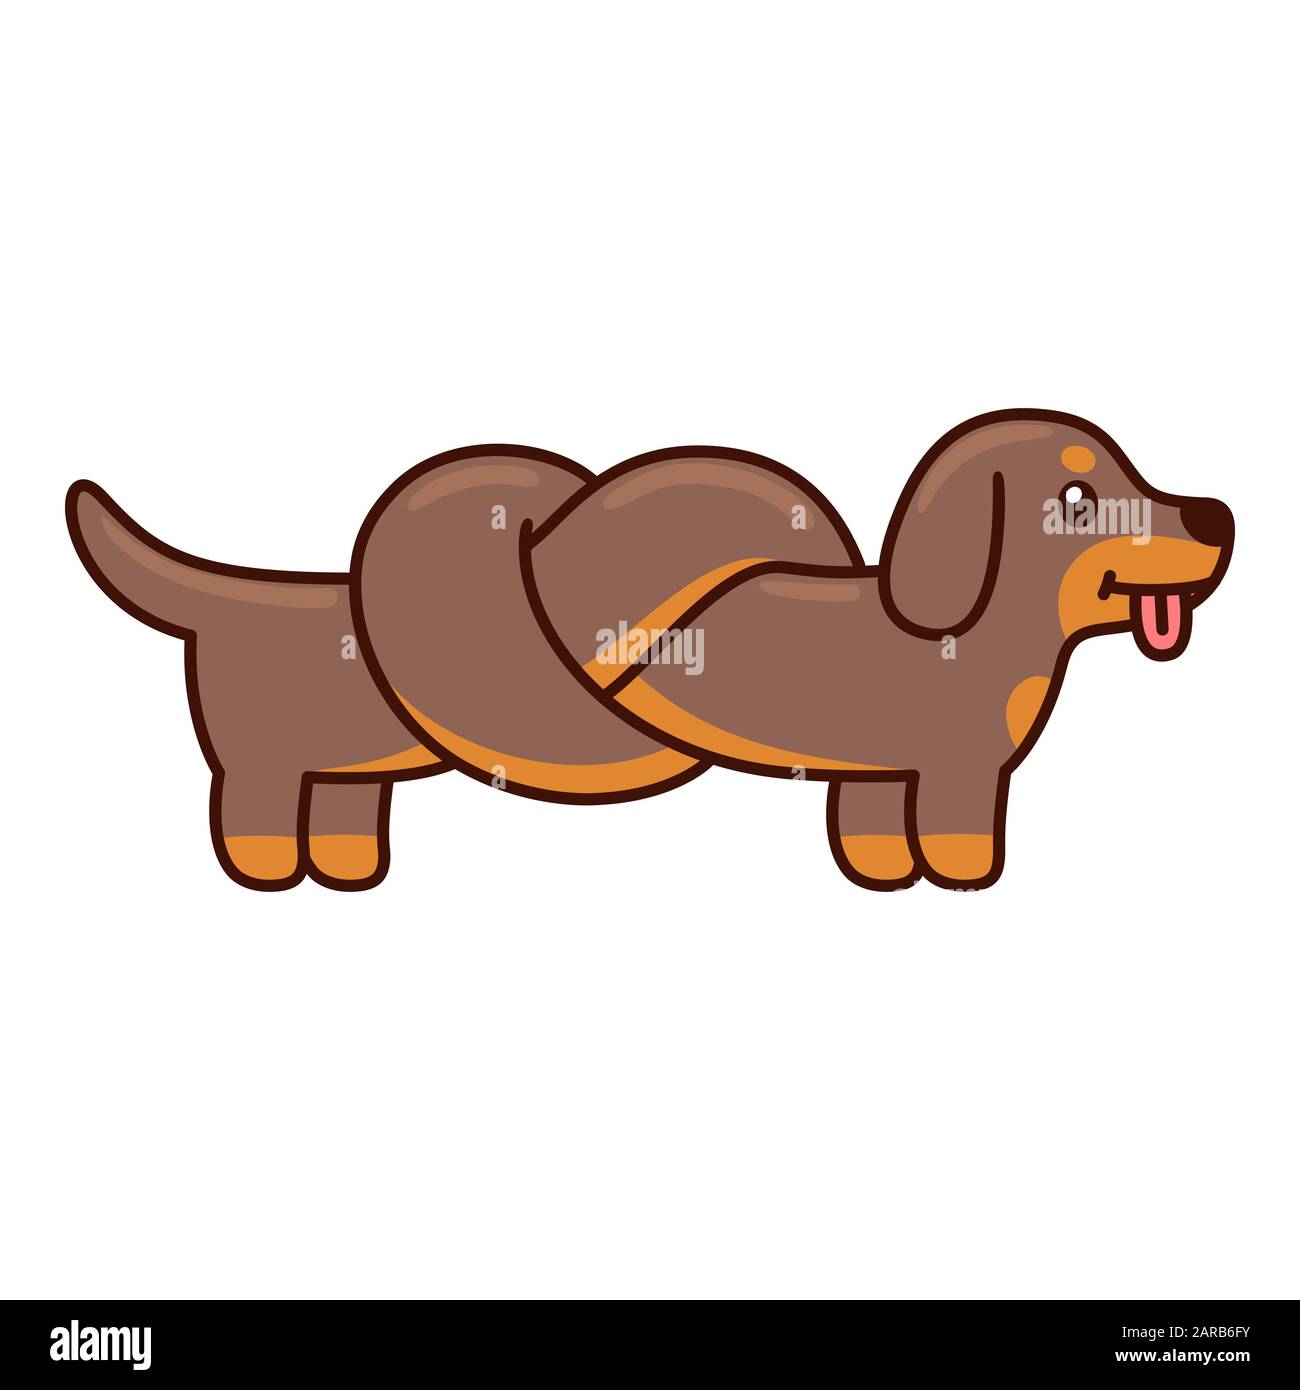 Cute cartoon dachshund with body tied in knot, funny long wiener dog doodle. Isolated vector illustration. Stock Vector